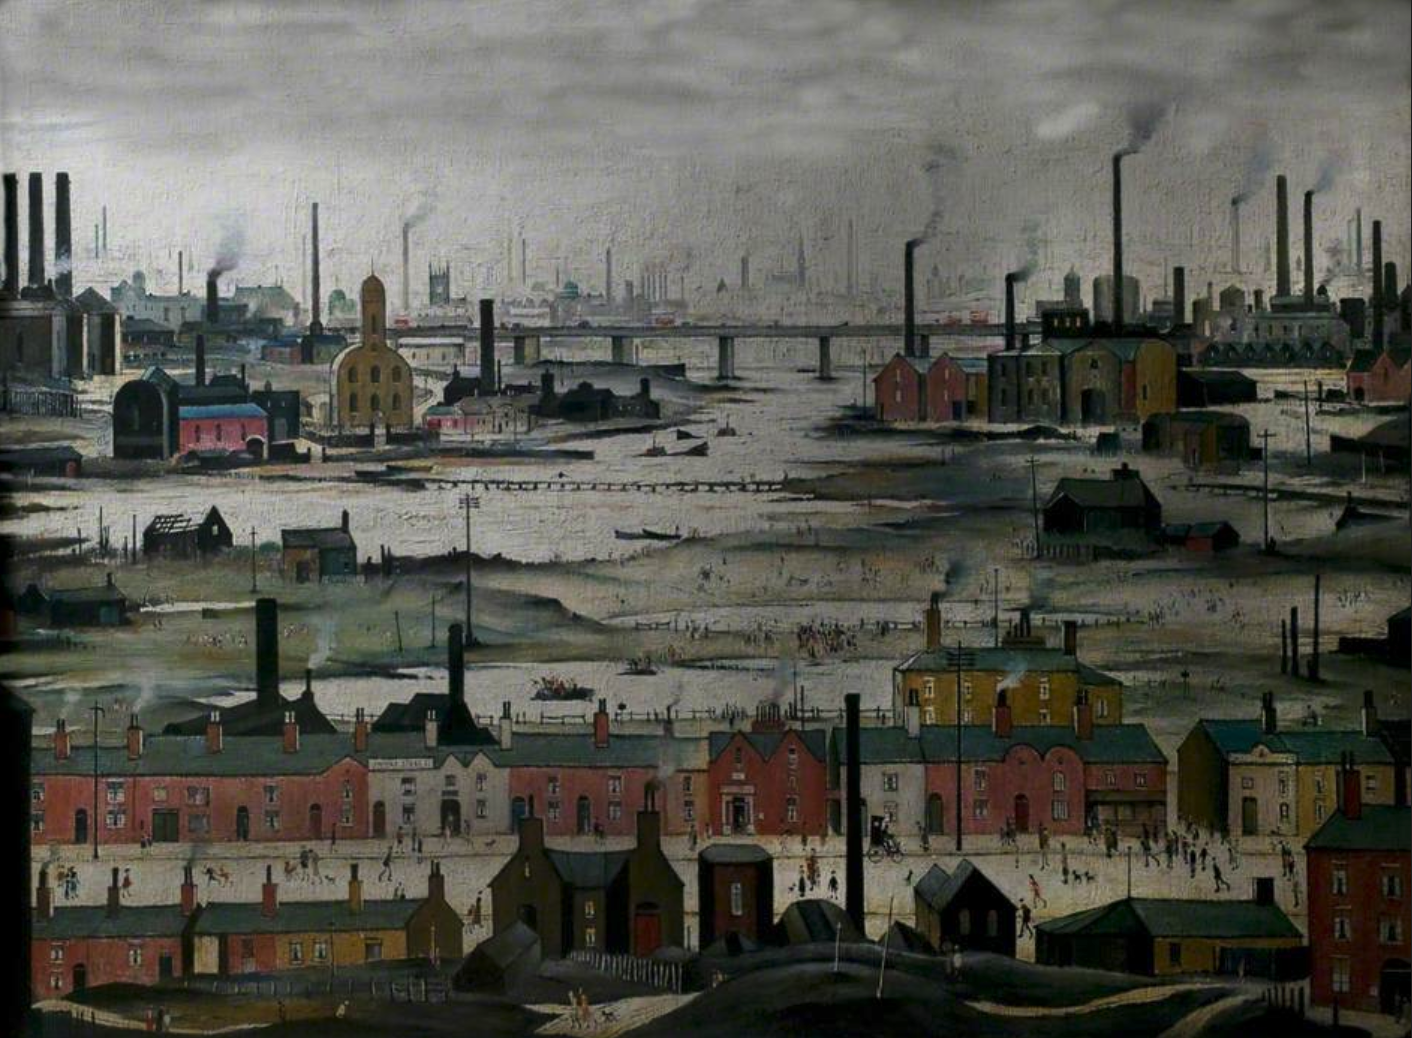 Industrial Landscape, River Scene (1950) by Laurence Stephen Lowry (1887 - 1976), English artist.